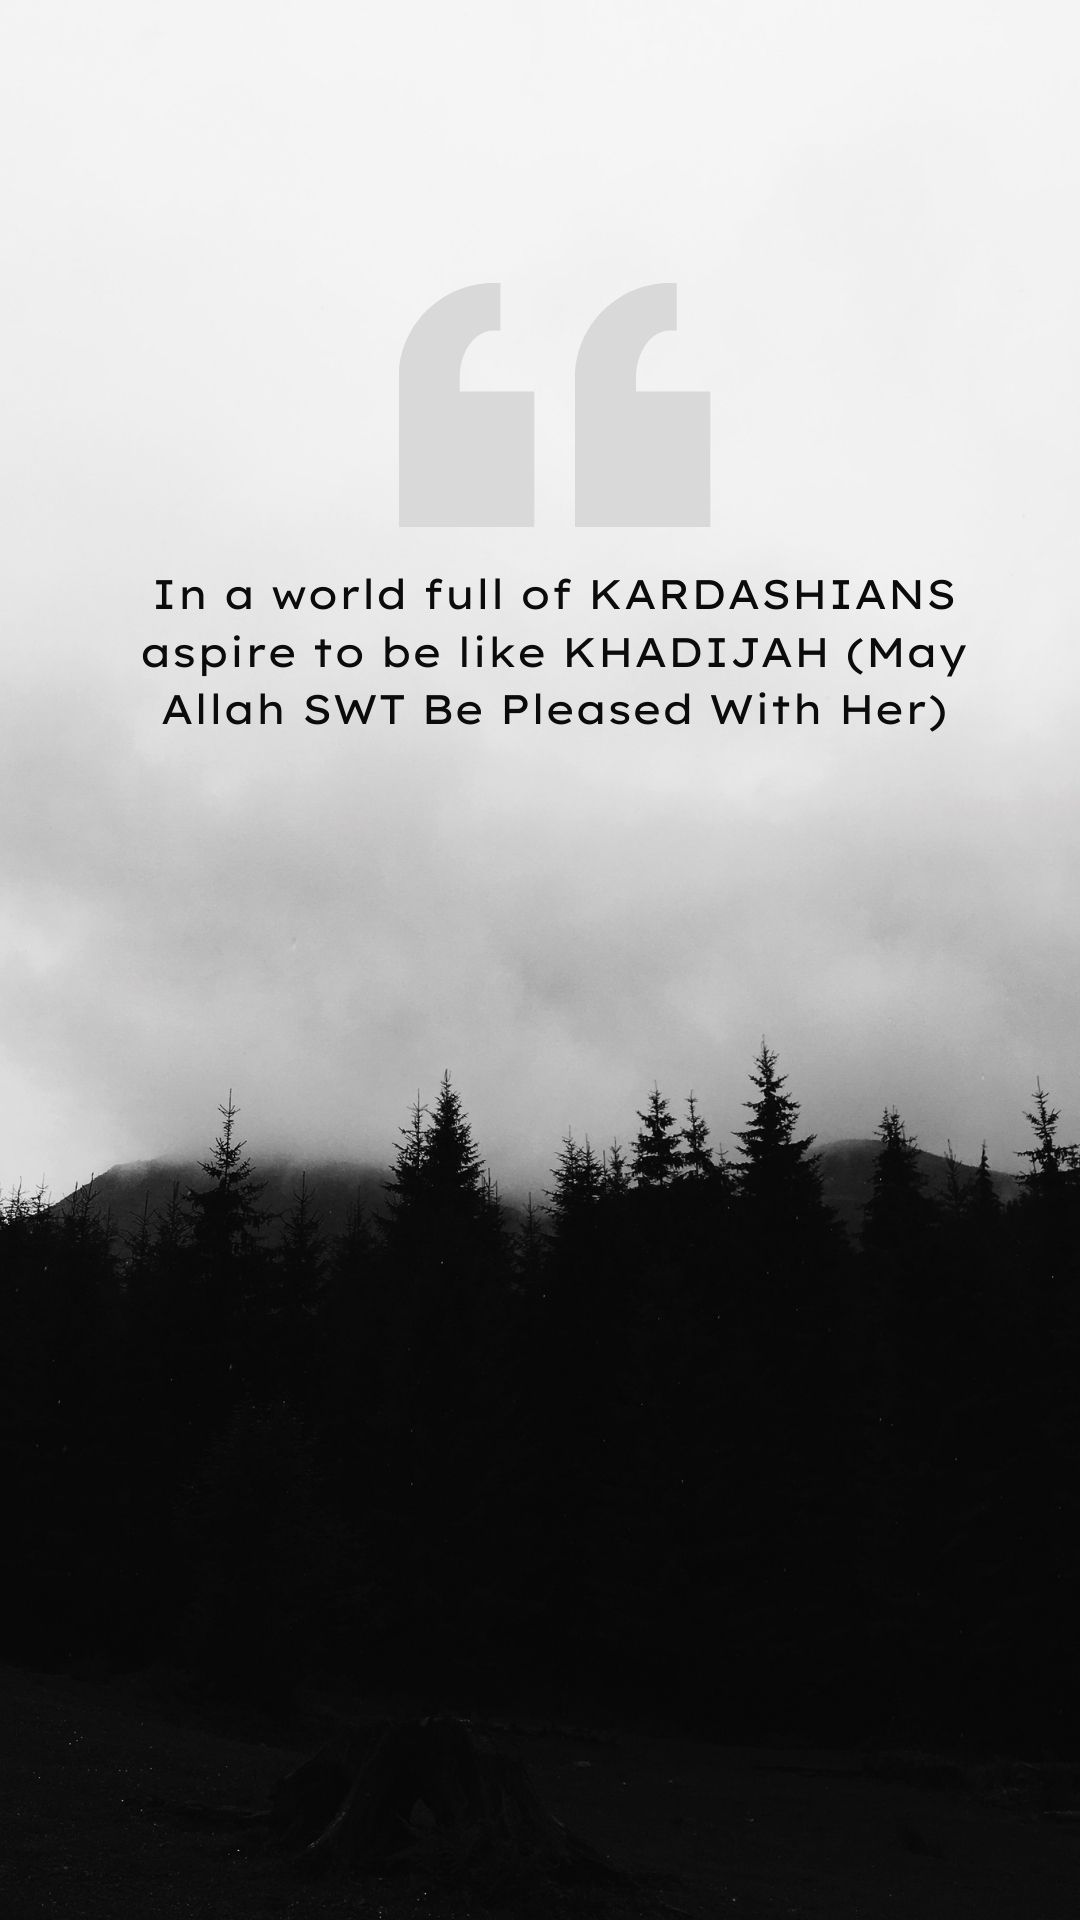 In a world full of KARDASHIANS aspire to be like KHADIJAH (May Allah SWT Be Pleased With Her)